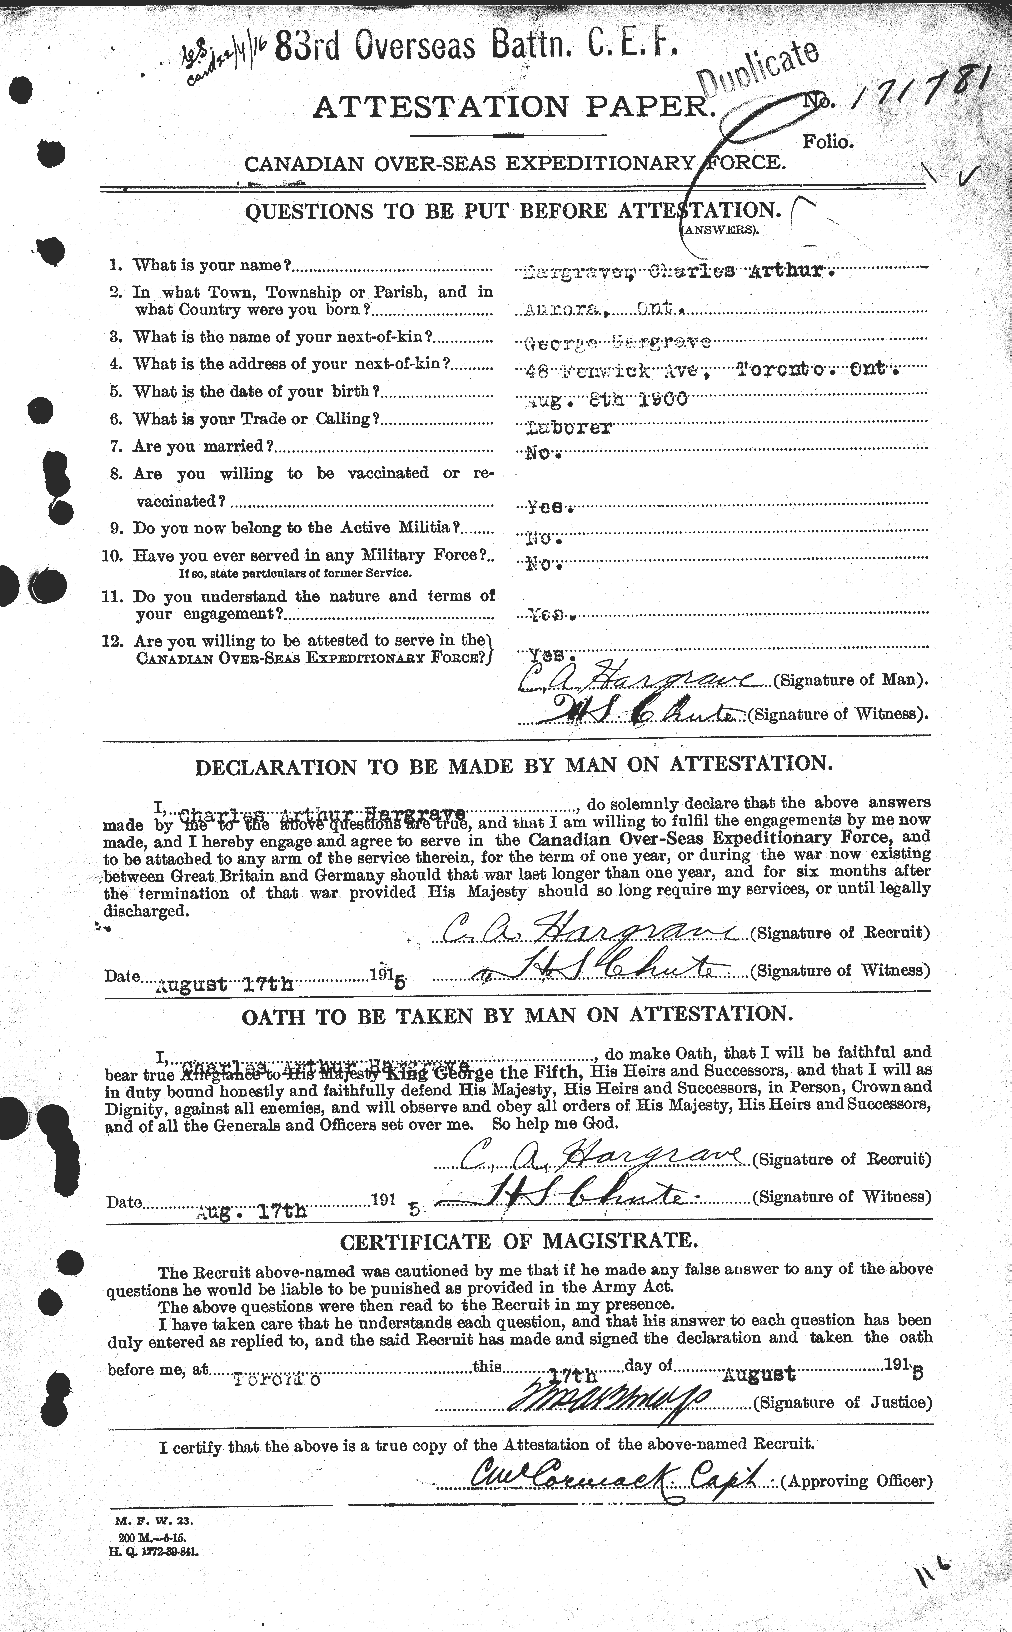 Personnel Records of the First World War - CEF 378025a